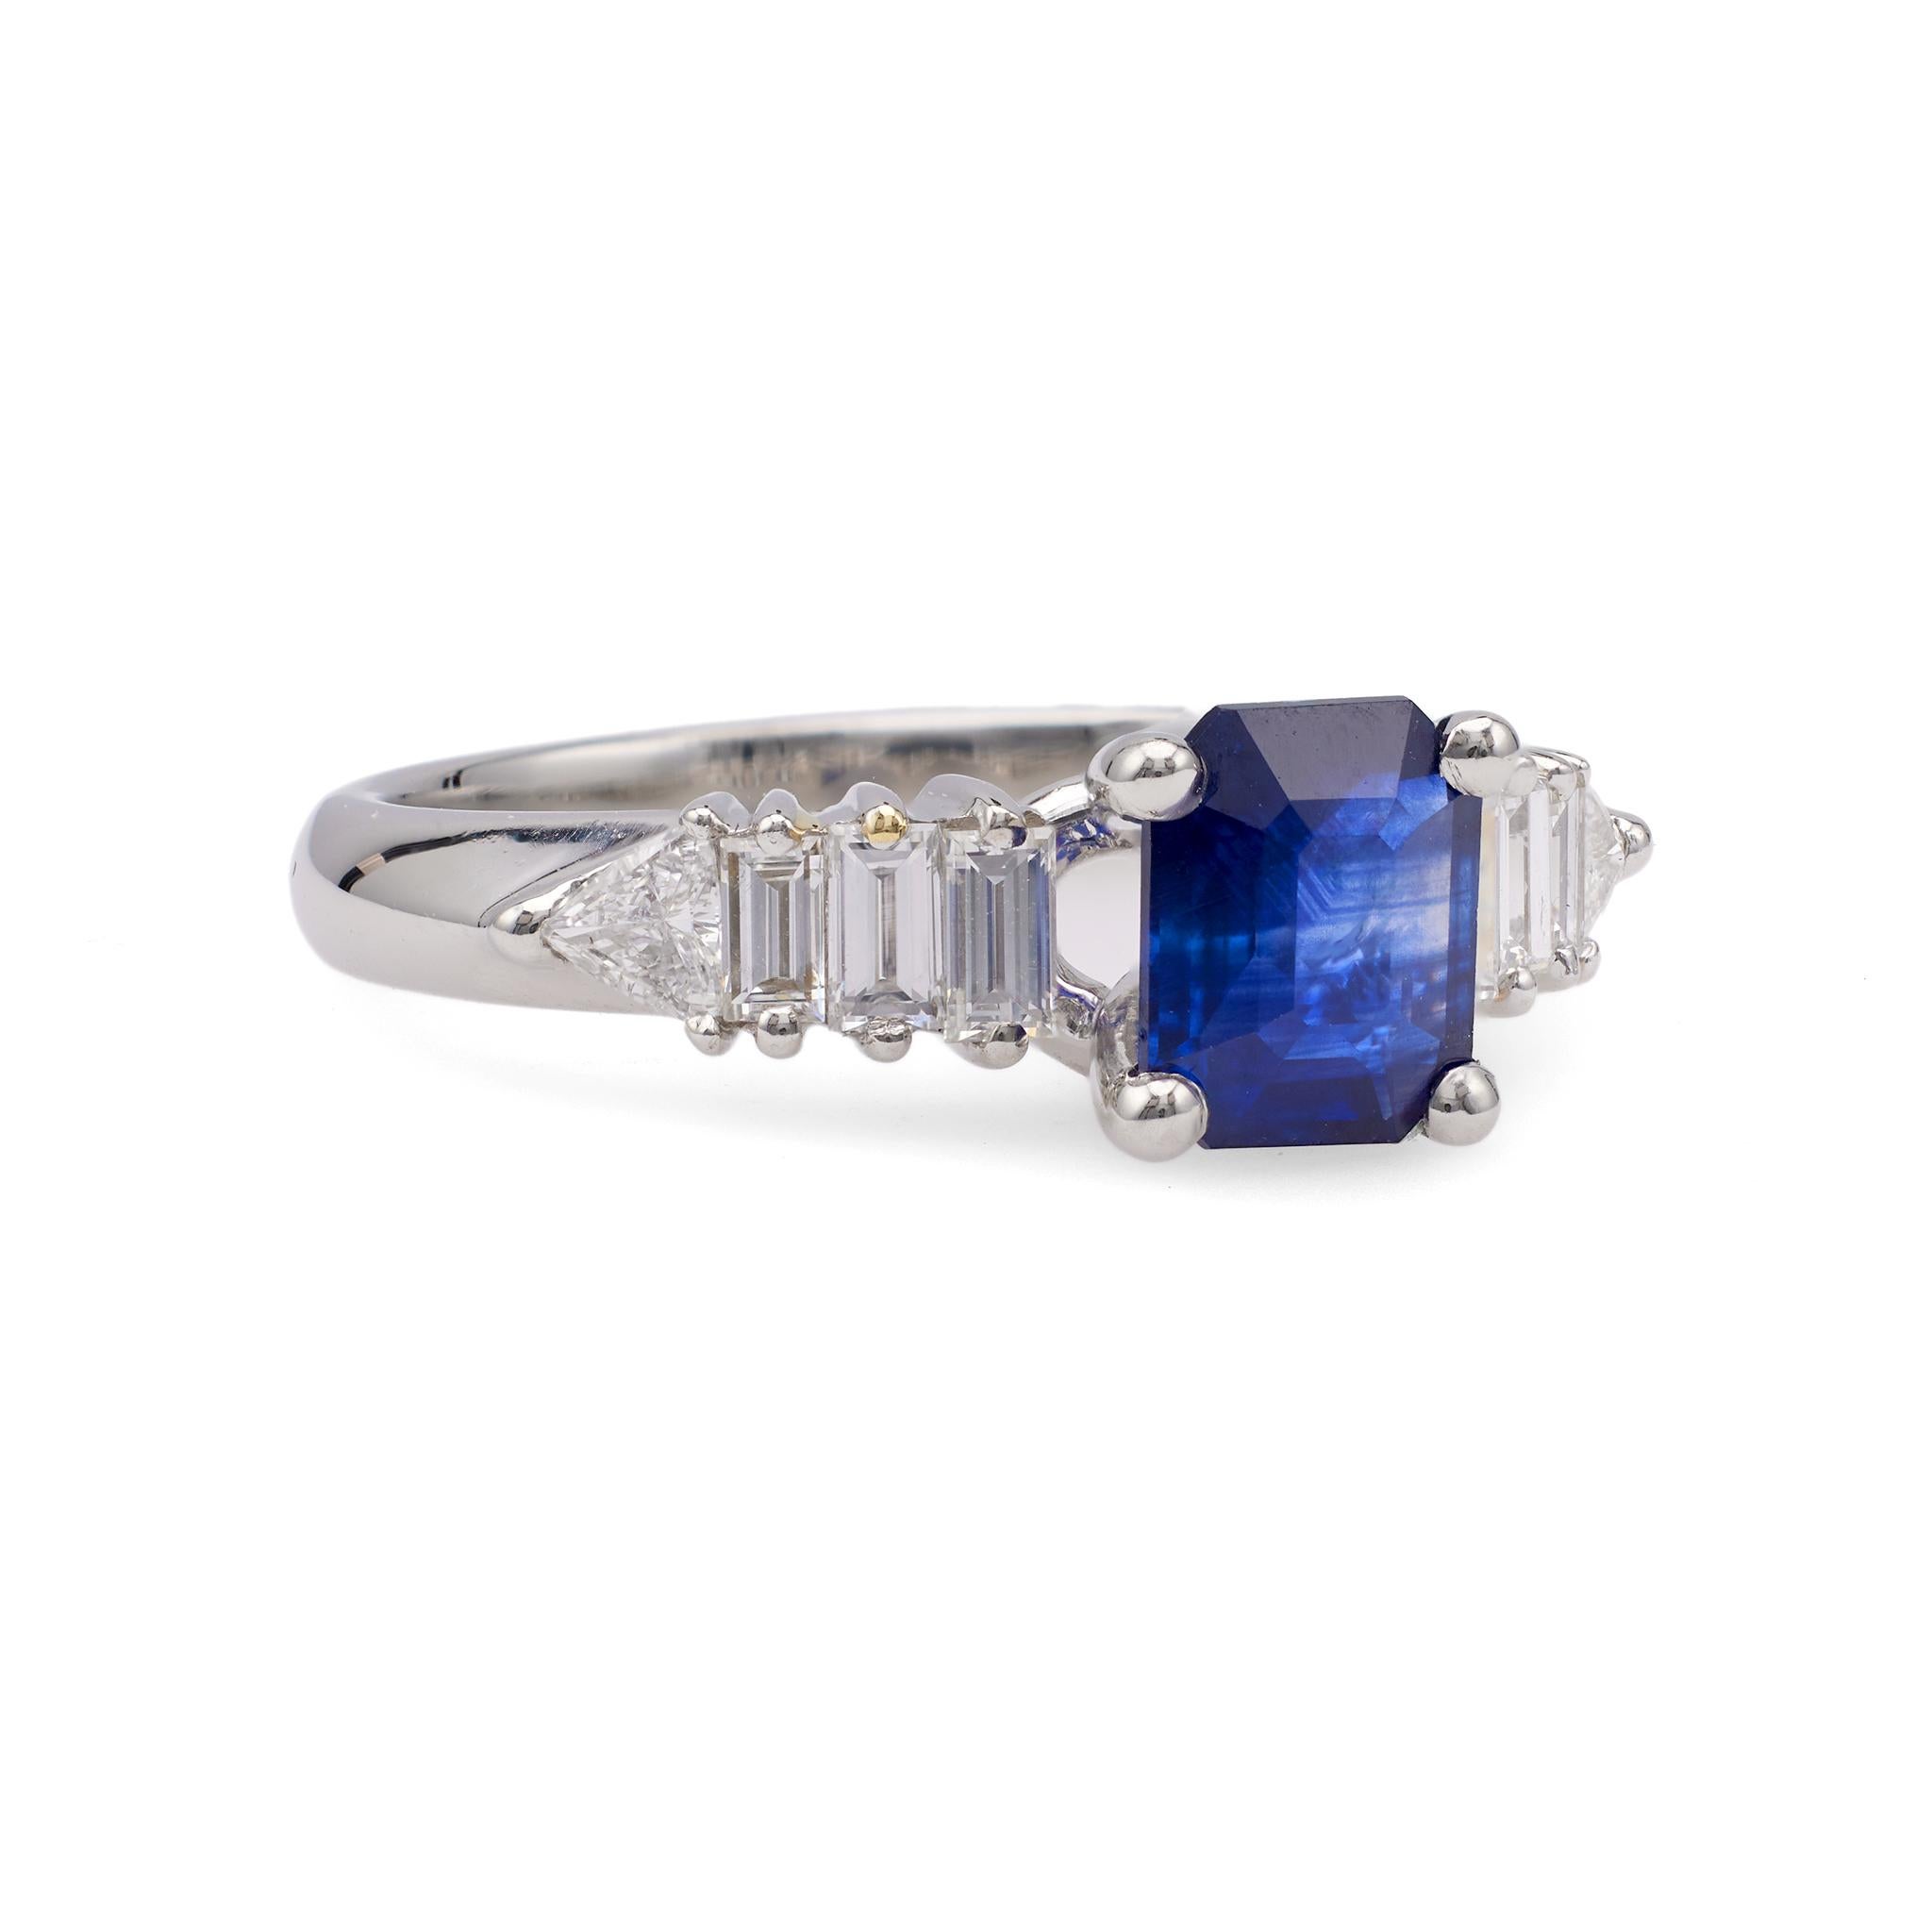 GIA 0.97 Carat Ceylon Sapphire Diamond Platinum Ring In Excellent Condition For Sale In Beverly Hills, CA